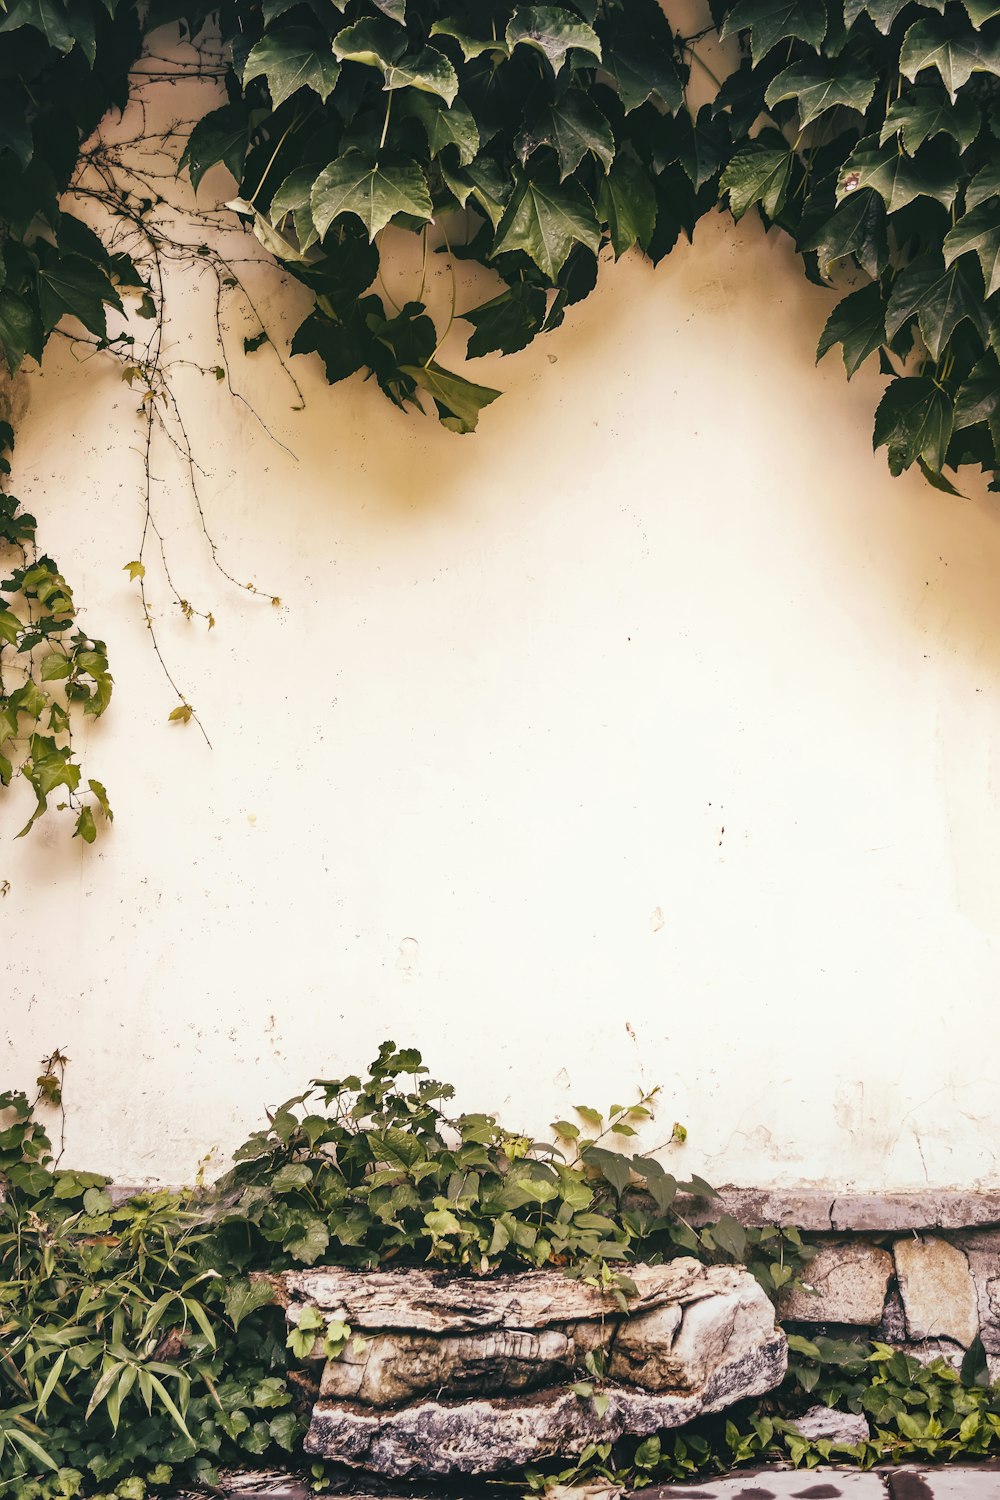 green plants beside yellow painted wall photo – Free Plant Image on Unsplash